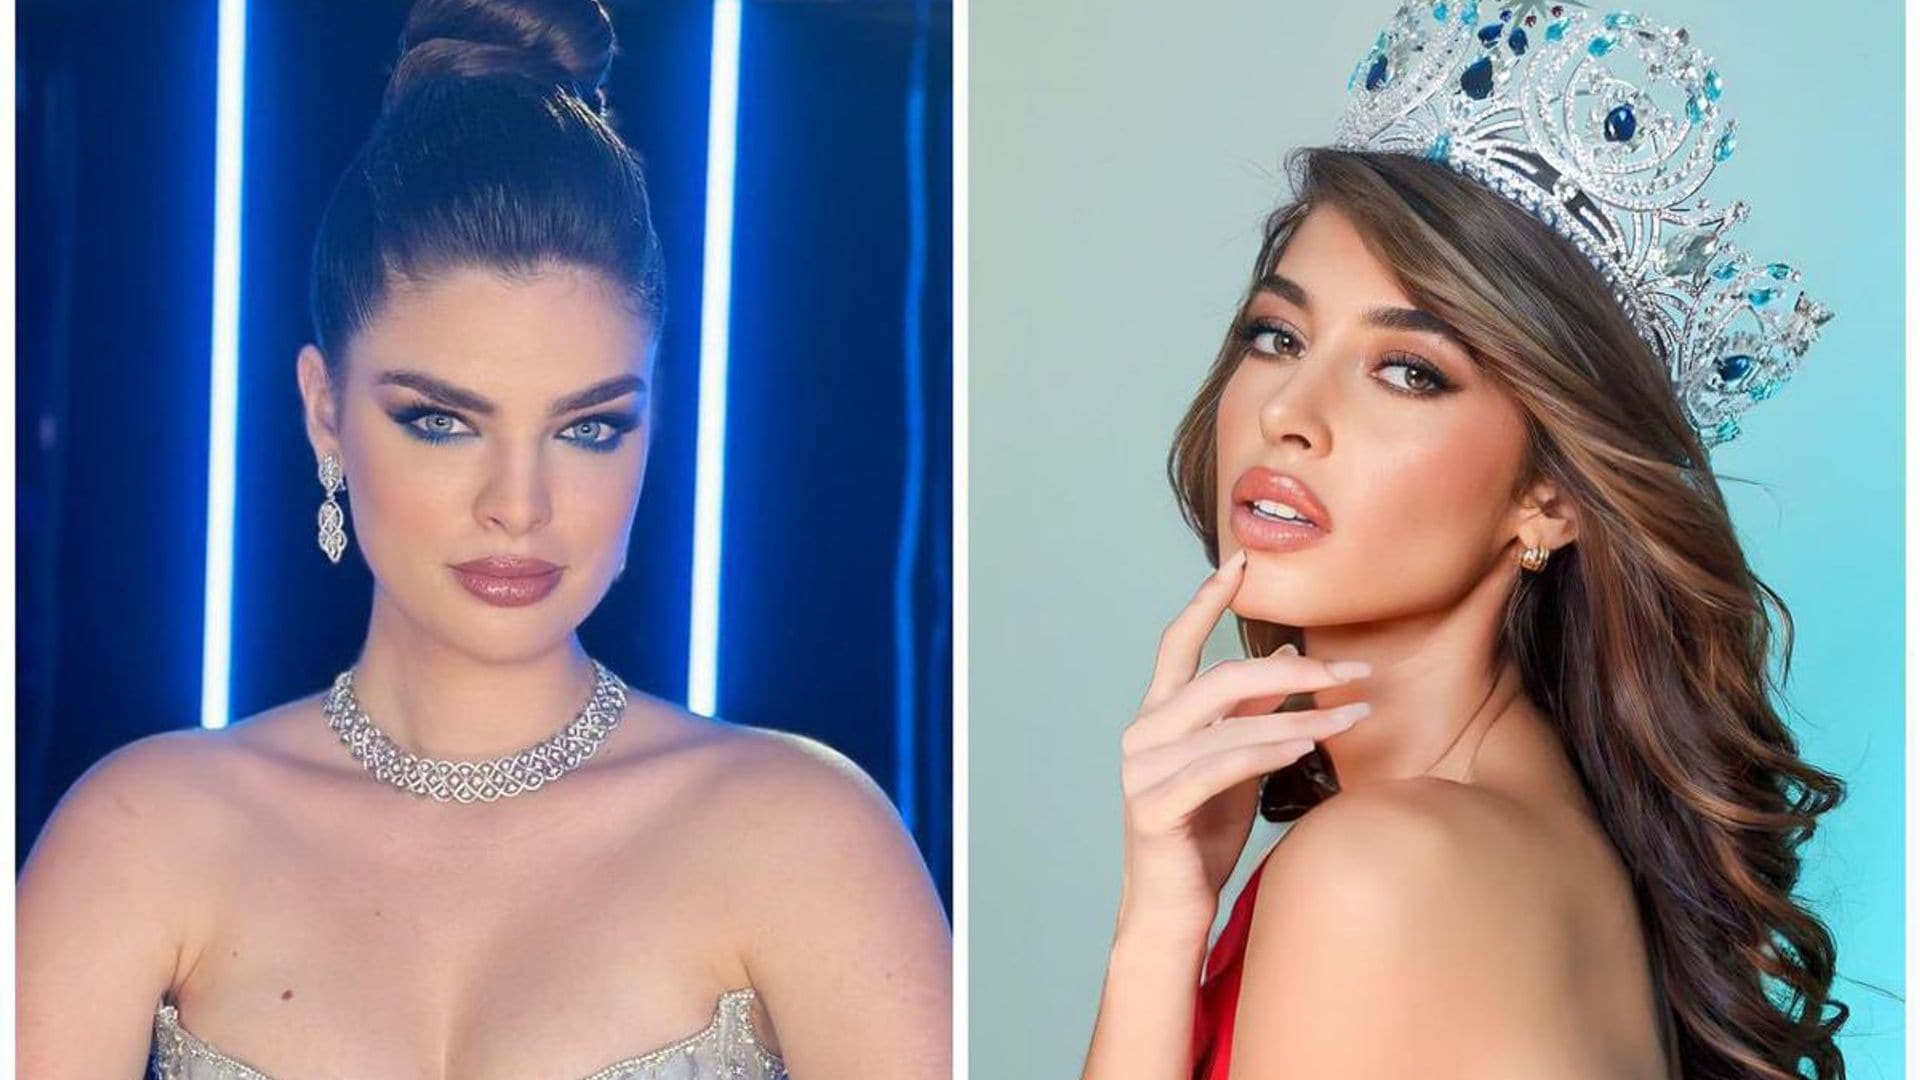 Nadia Ferreira responds to allegations that she prevented Miss Dominican Republic from being a Miss Universe finalist